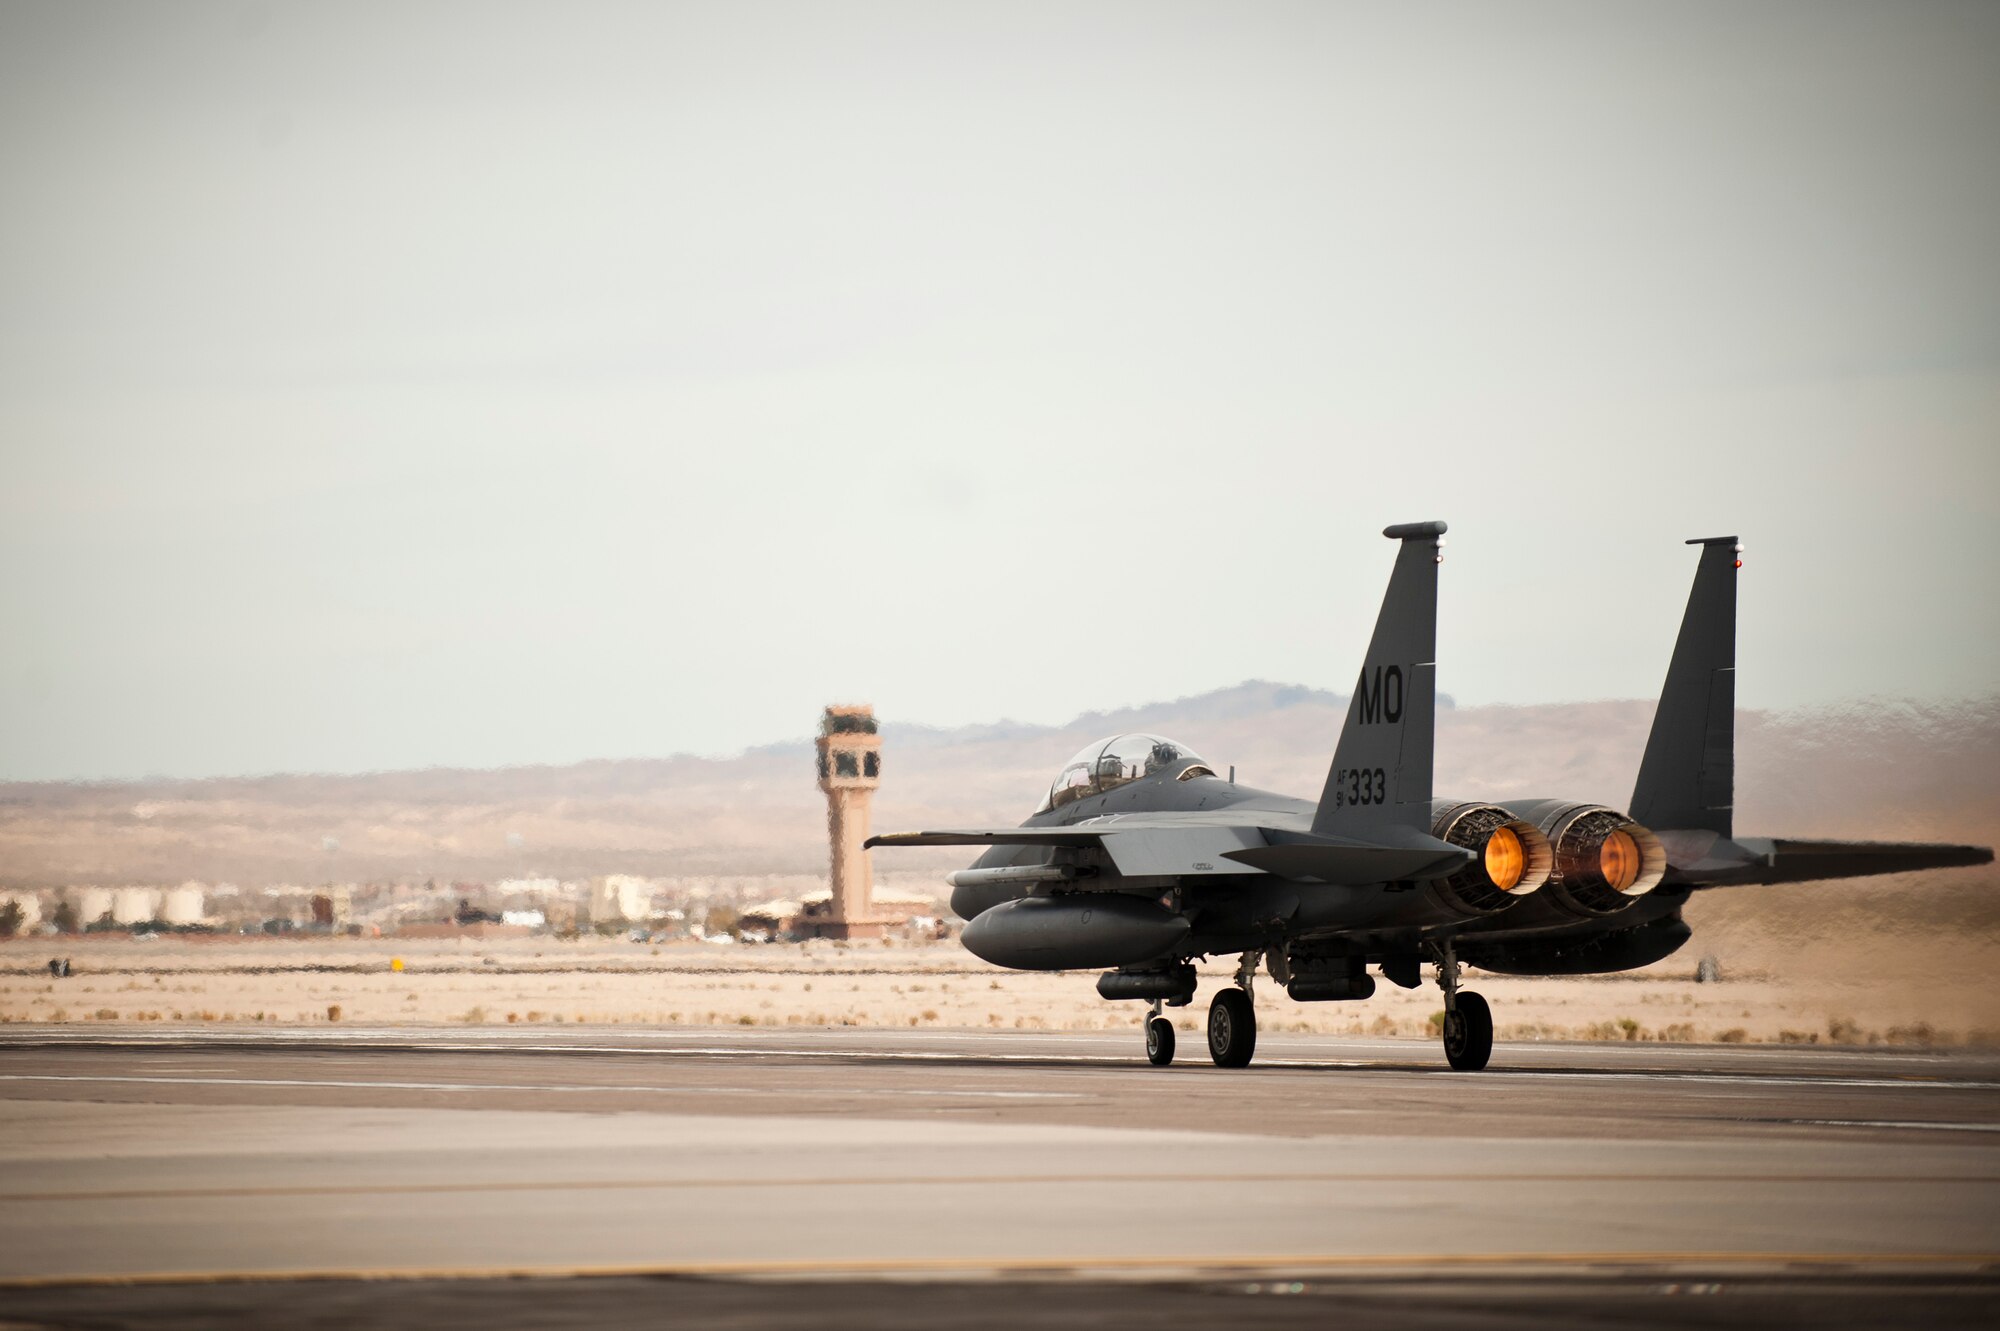 An F-15E Strike Eagle from the 391st Fighter Squadron, Mountain Home Air Force Base, Idaho, fires the afterburner prior to taking off for a training mission Jan. 29, 2014, at Nellis Air Force Base, Nev. During Red Flag exercises, the Air Force’s 2.9 million acre Nevada Test and Training Range plays host to multiple simulated air wars that provide the most realistic training possible for U.S. and coalition pilots. (U.S. Air Force photo by Airman 1st Class Joshua Kleinholz)